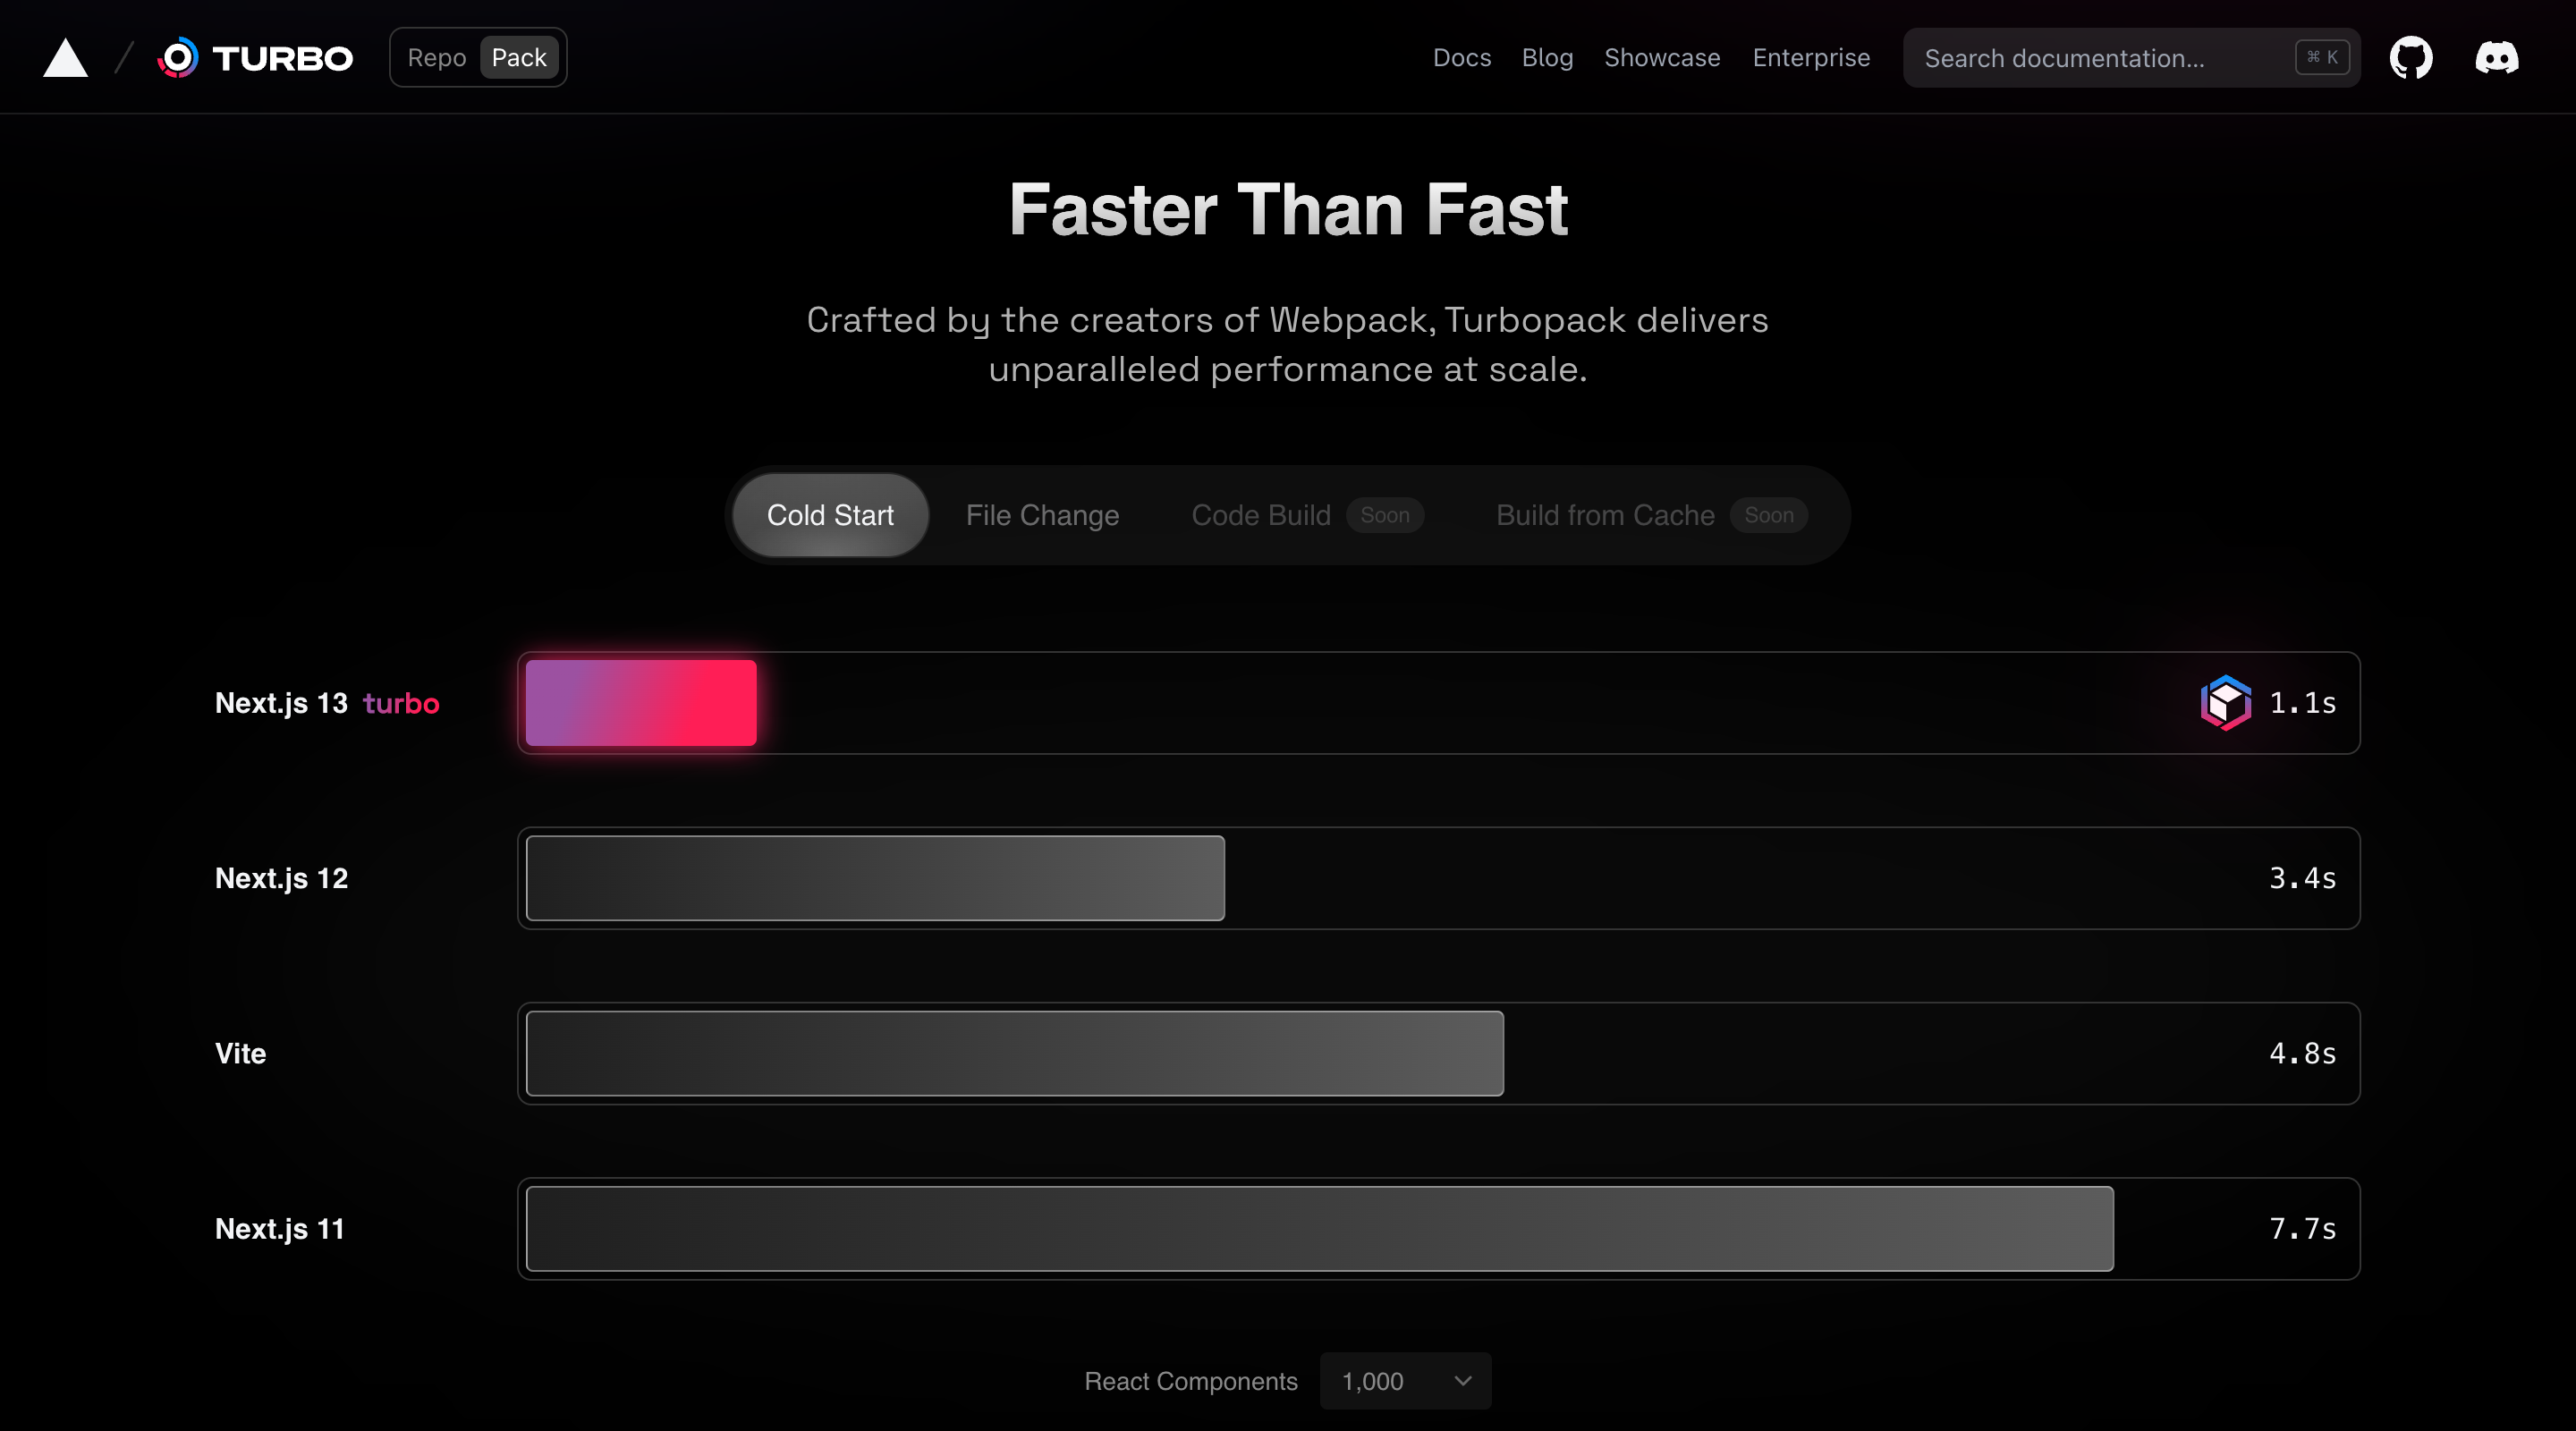 Screenshot of a section comparing Next.js 13 with Turbo to other frameworks and build systems. The headline says “Faster Than Fast.” There’s a subheadline and a horizontal menu that looks like a toggle. The selected item is “Cold Start.” Below is the chart, which consists of four bars with an area filled out that indicates how fast it loaded. The bar that says “Next.js 13 turbo” has the least amount filled out, meaning it was the fastest.